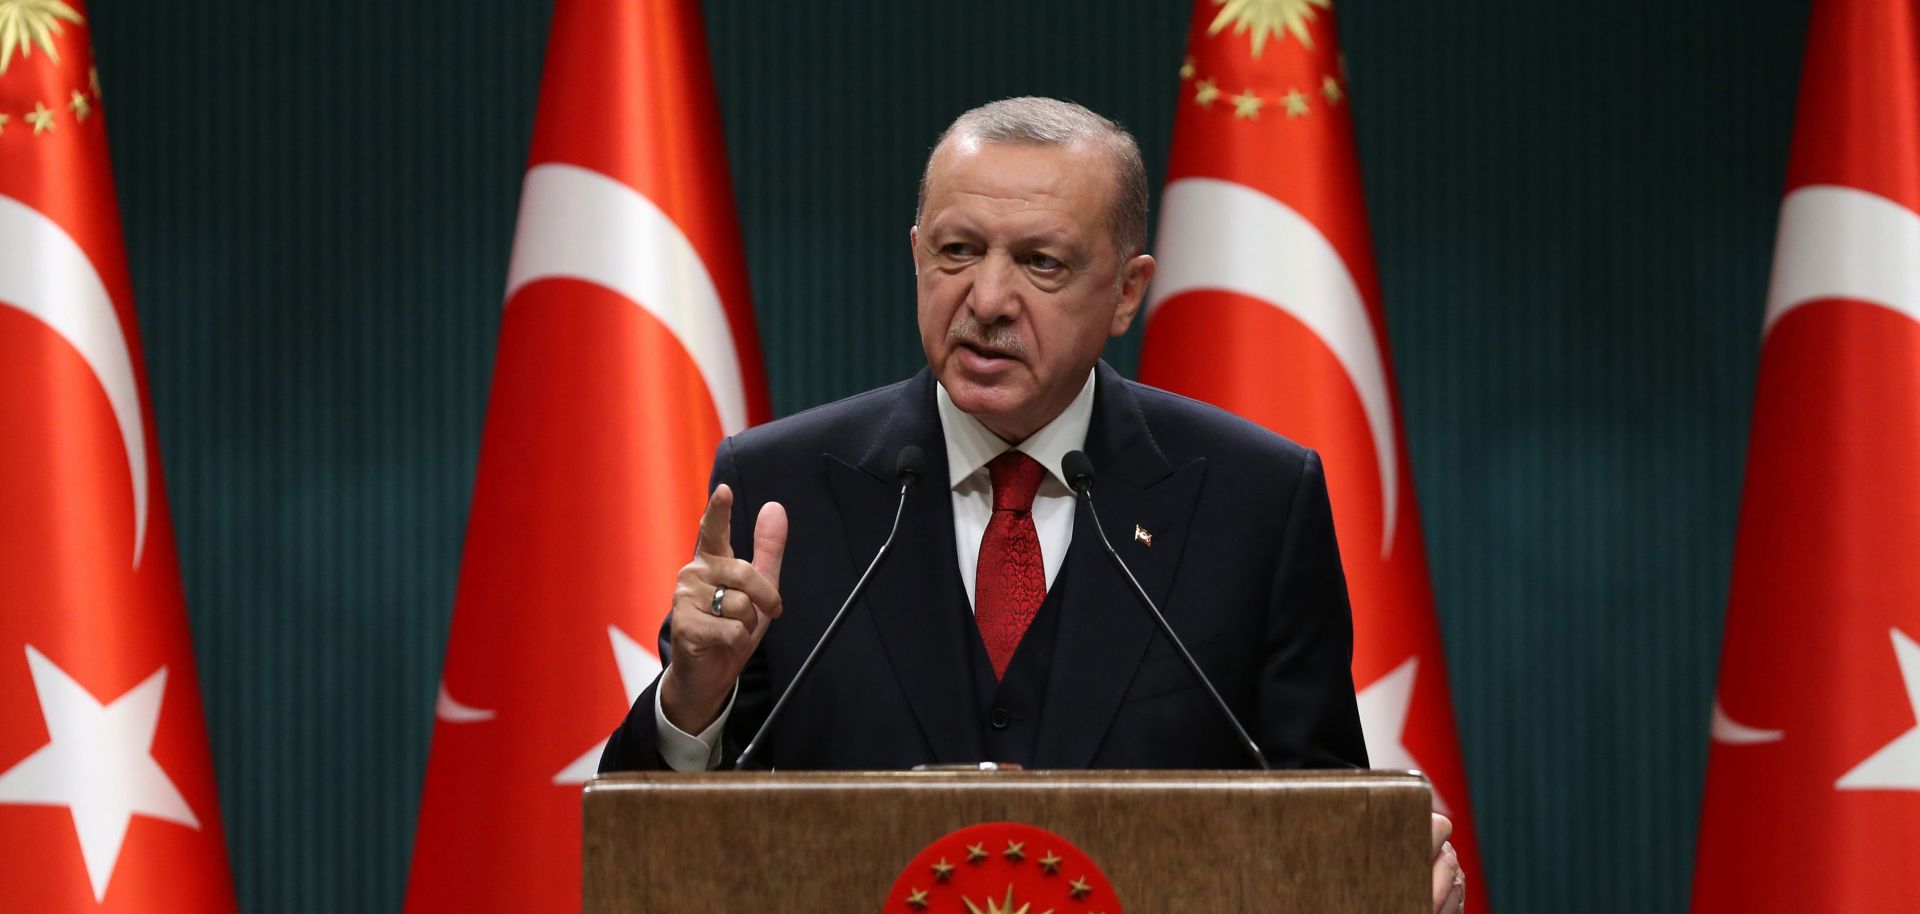 Turkish President Recep Tayyip Erdogan gestures as he gives a press conference in Ankara, Turkey, on September 21, 2020. 